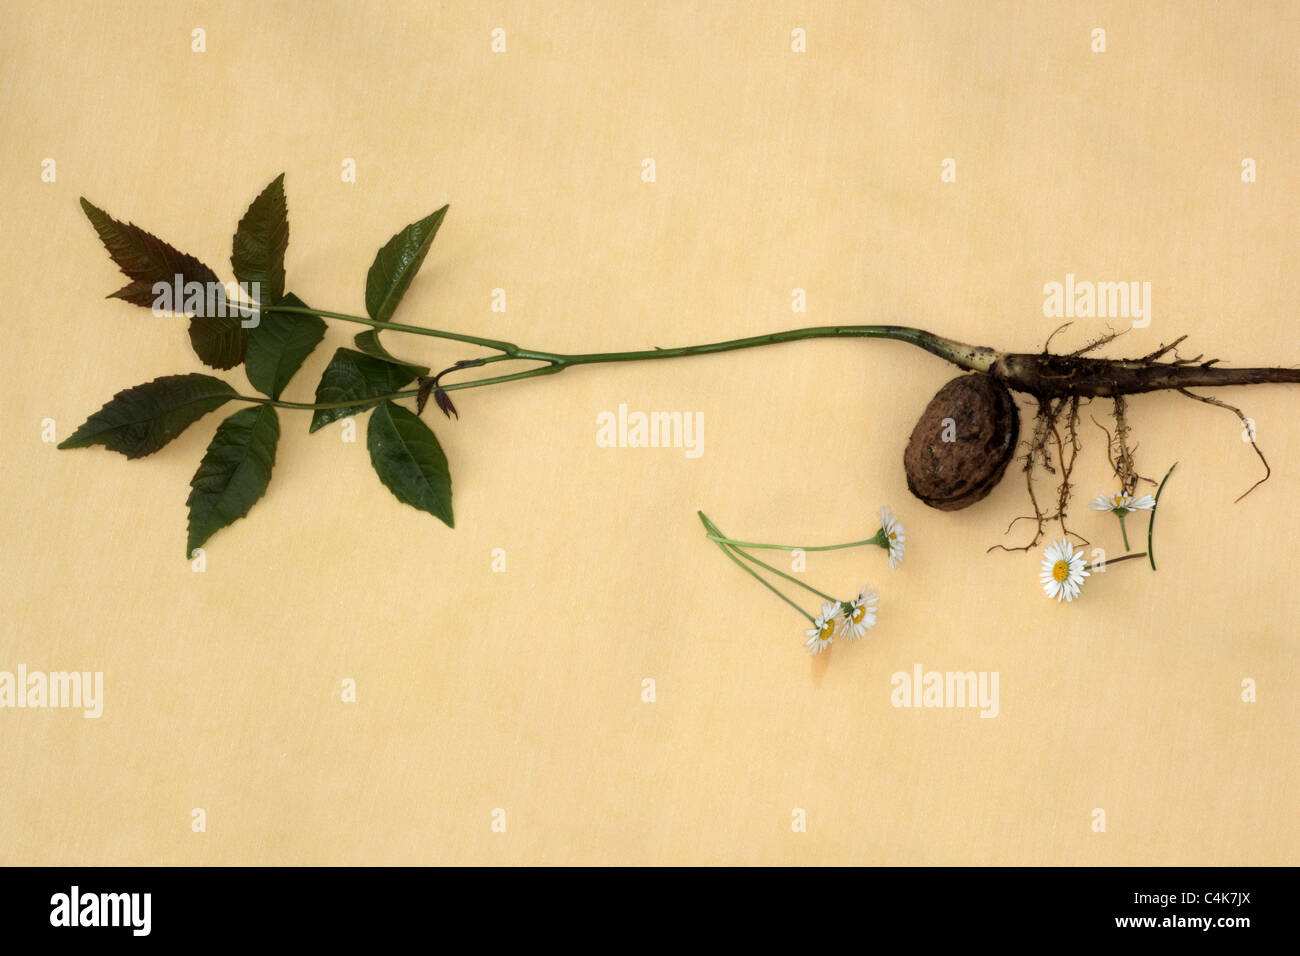 walnut shoot Juglans regia with roots and young fresh leaves on yellow background Stock Photo